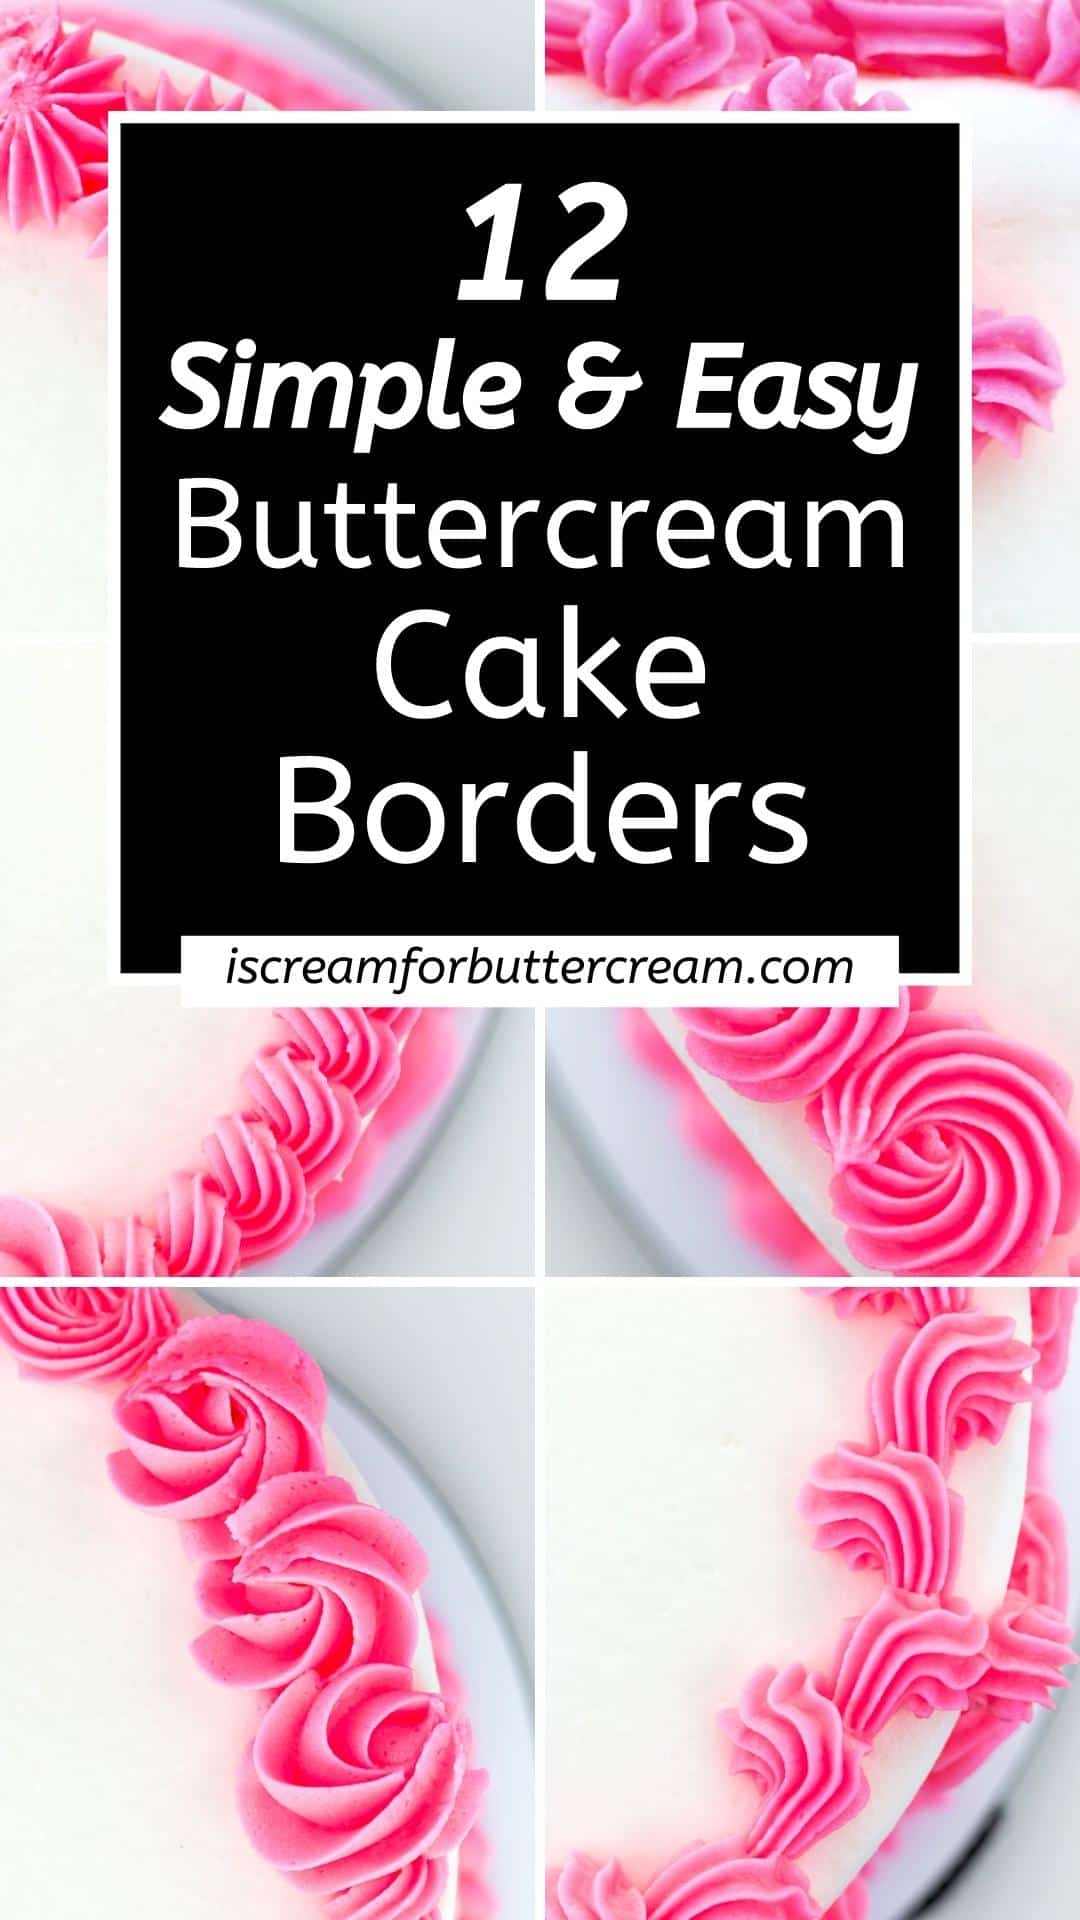 Pink icing borders pin with text overlay.